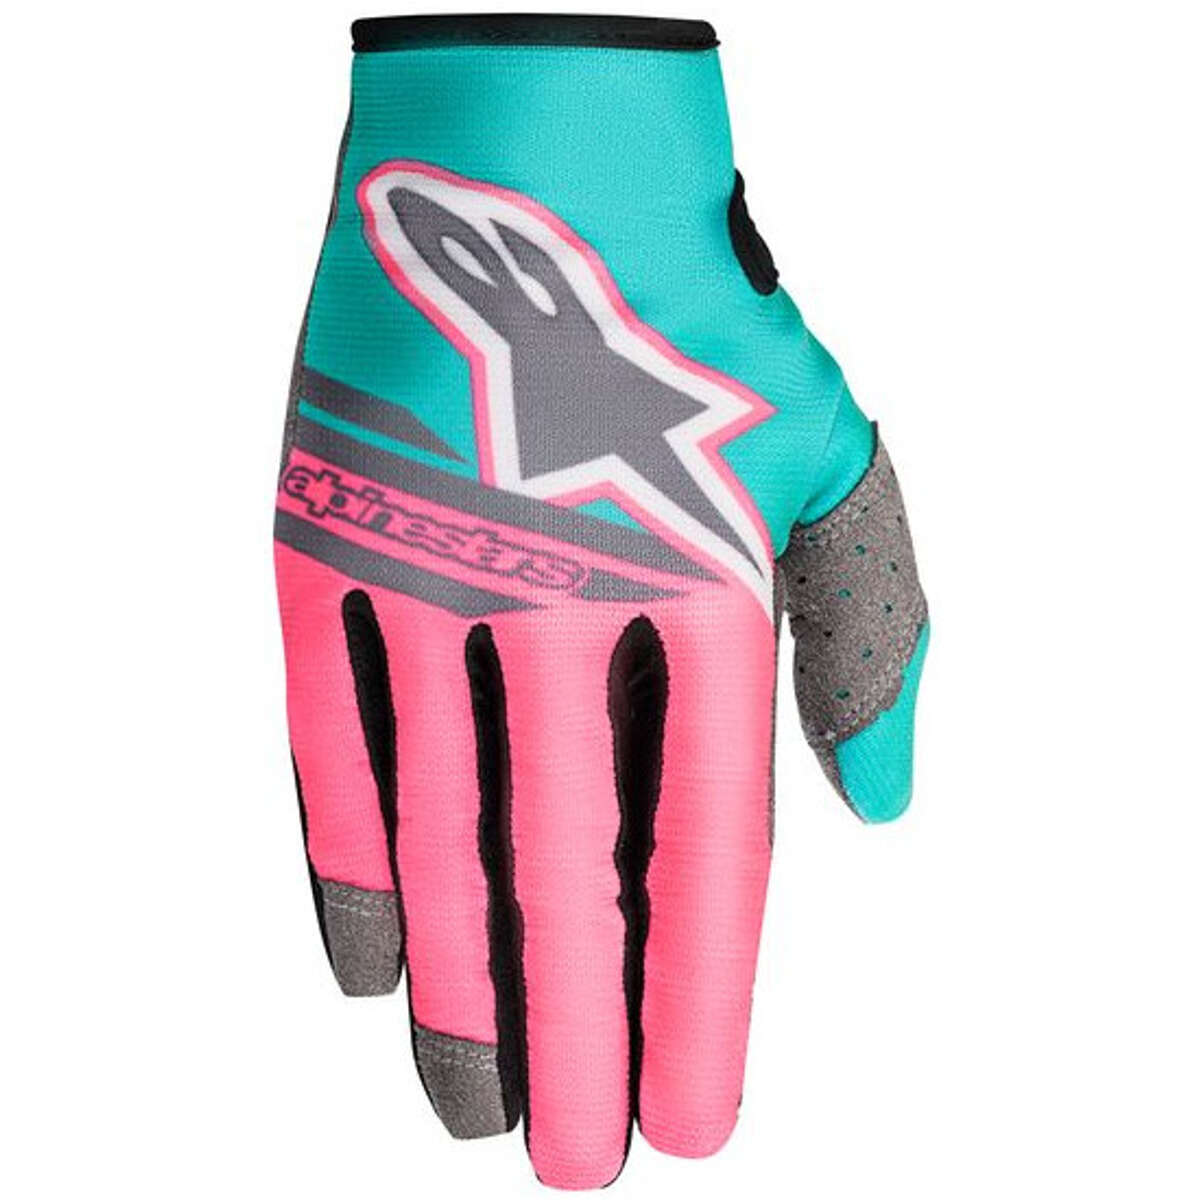 Alpinestars Gloves Radar Flight Limited Edition AngelLimited Edition Indy Vice - Grey/Pink/Turquoise